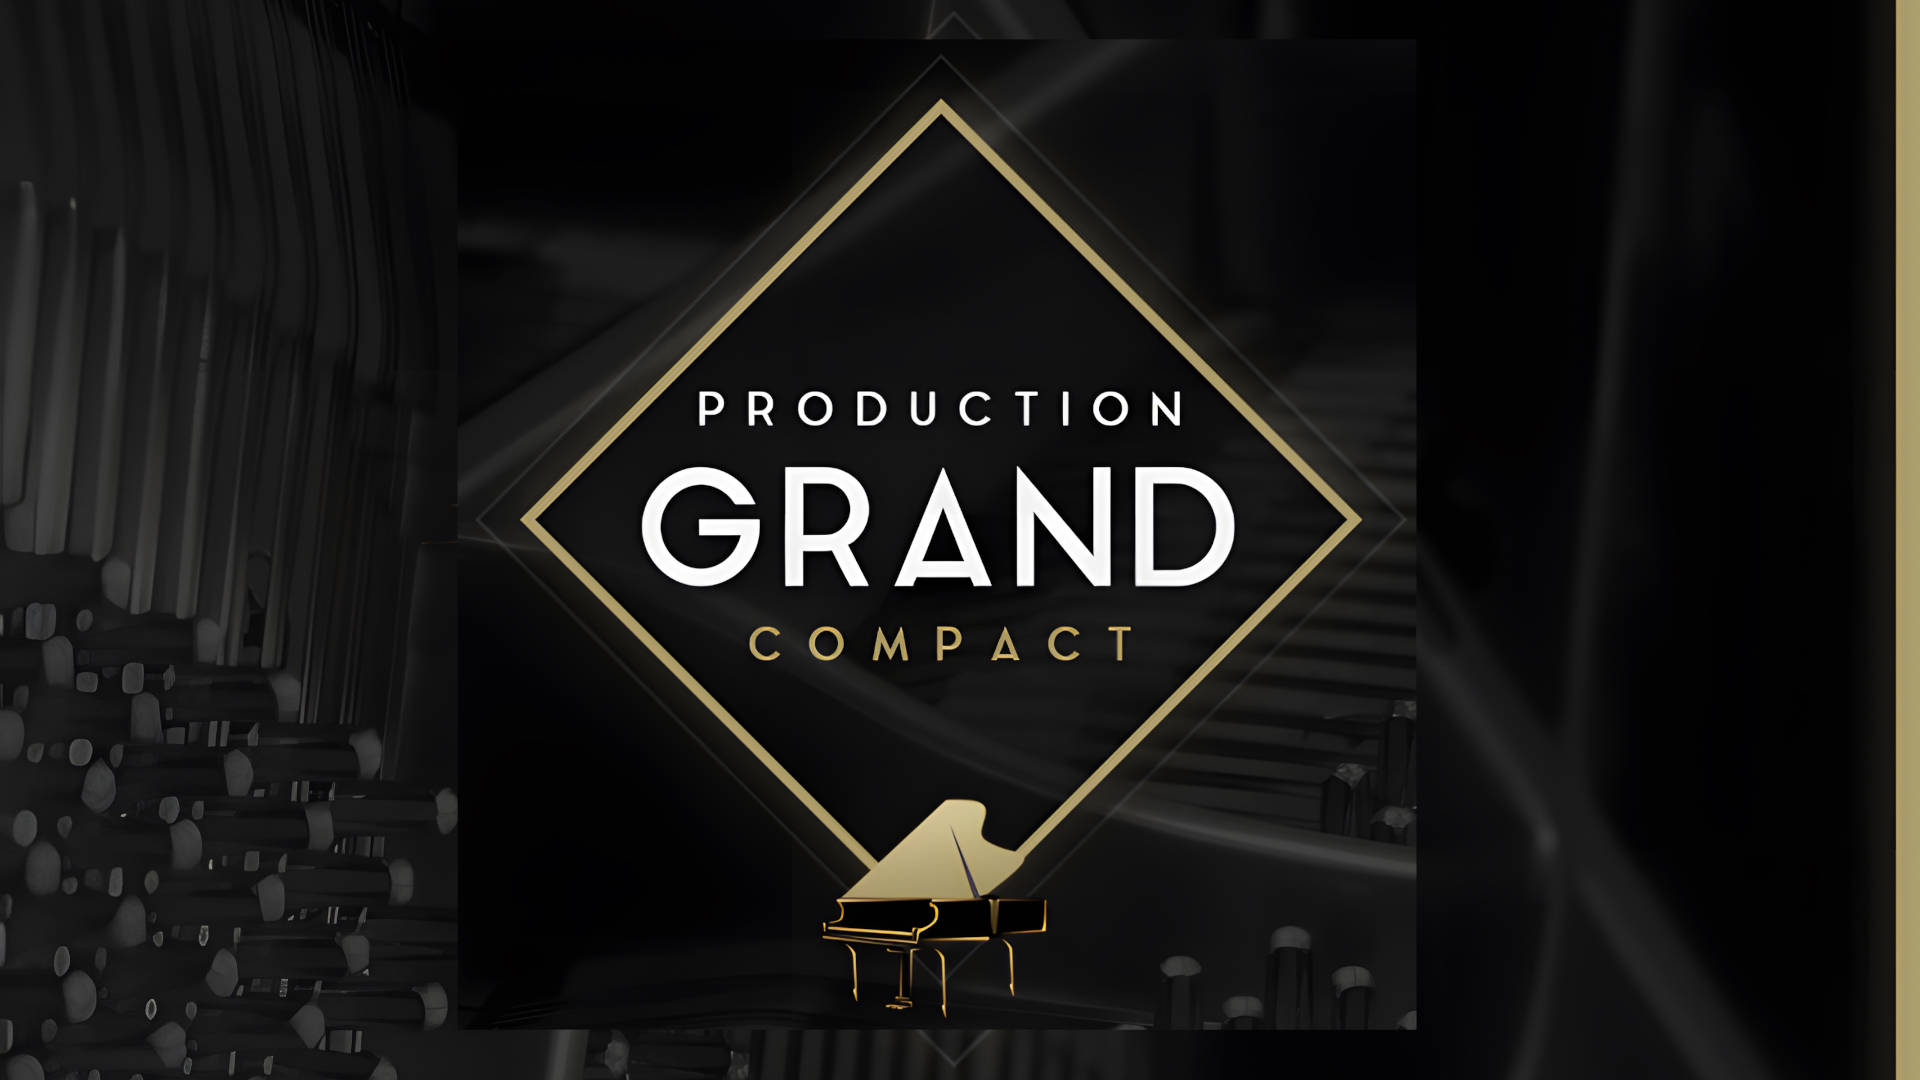 Production Grand Compact